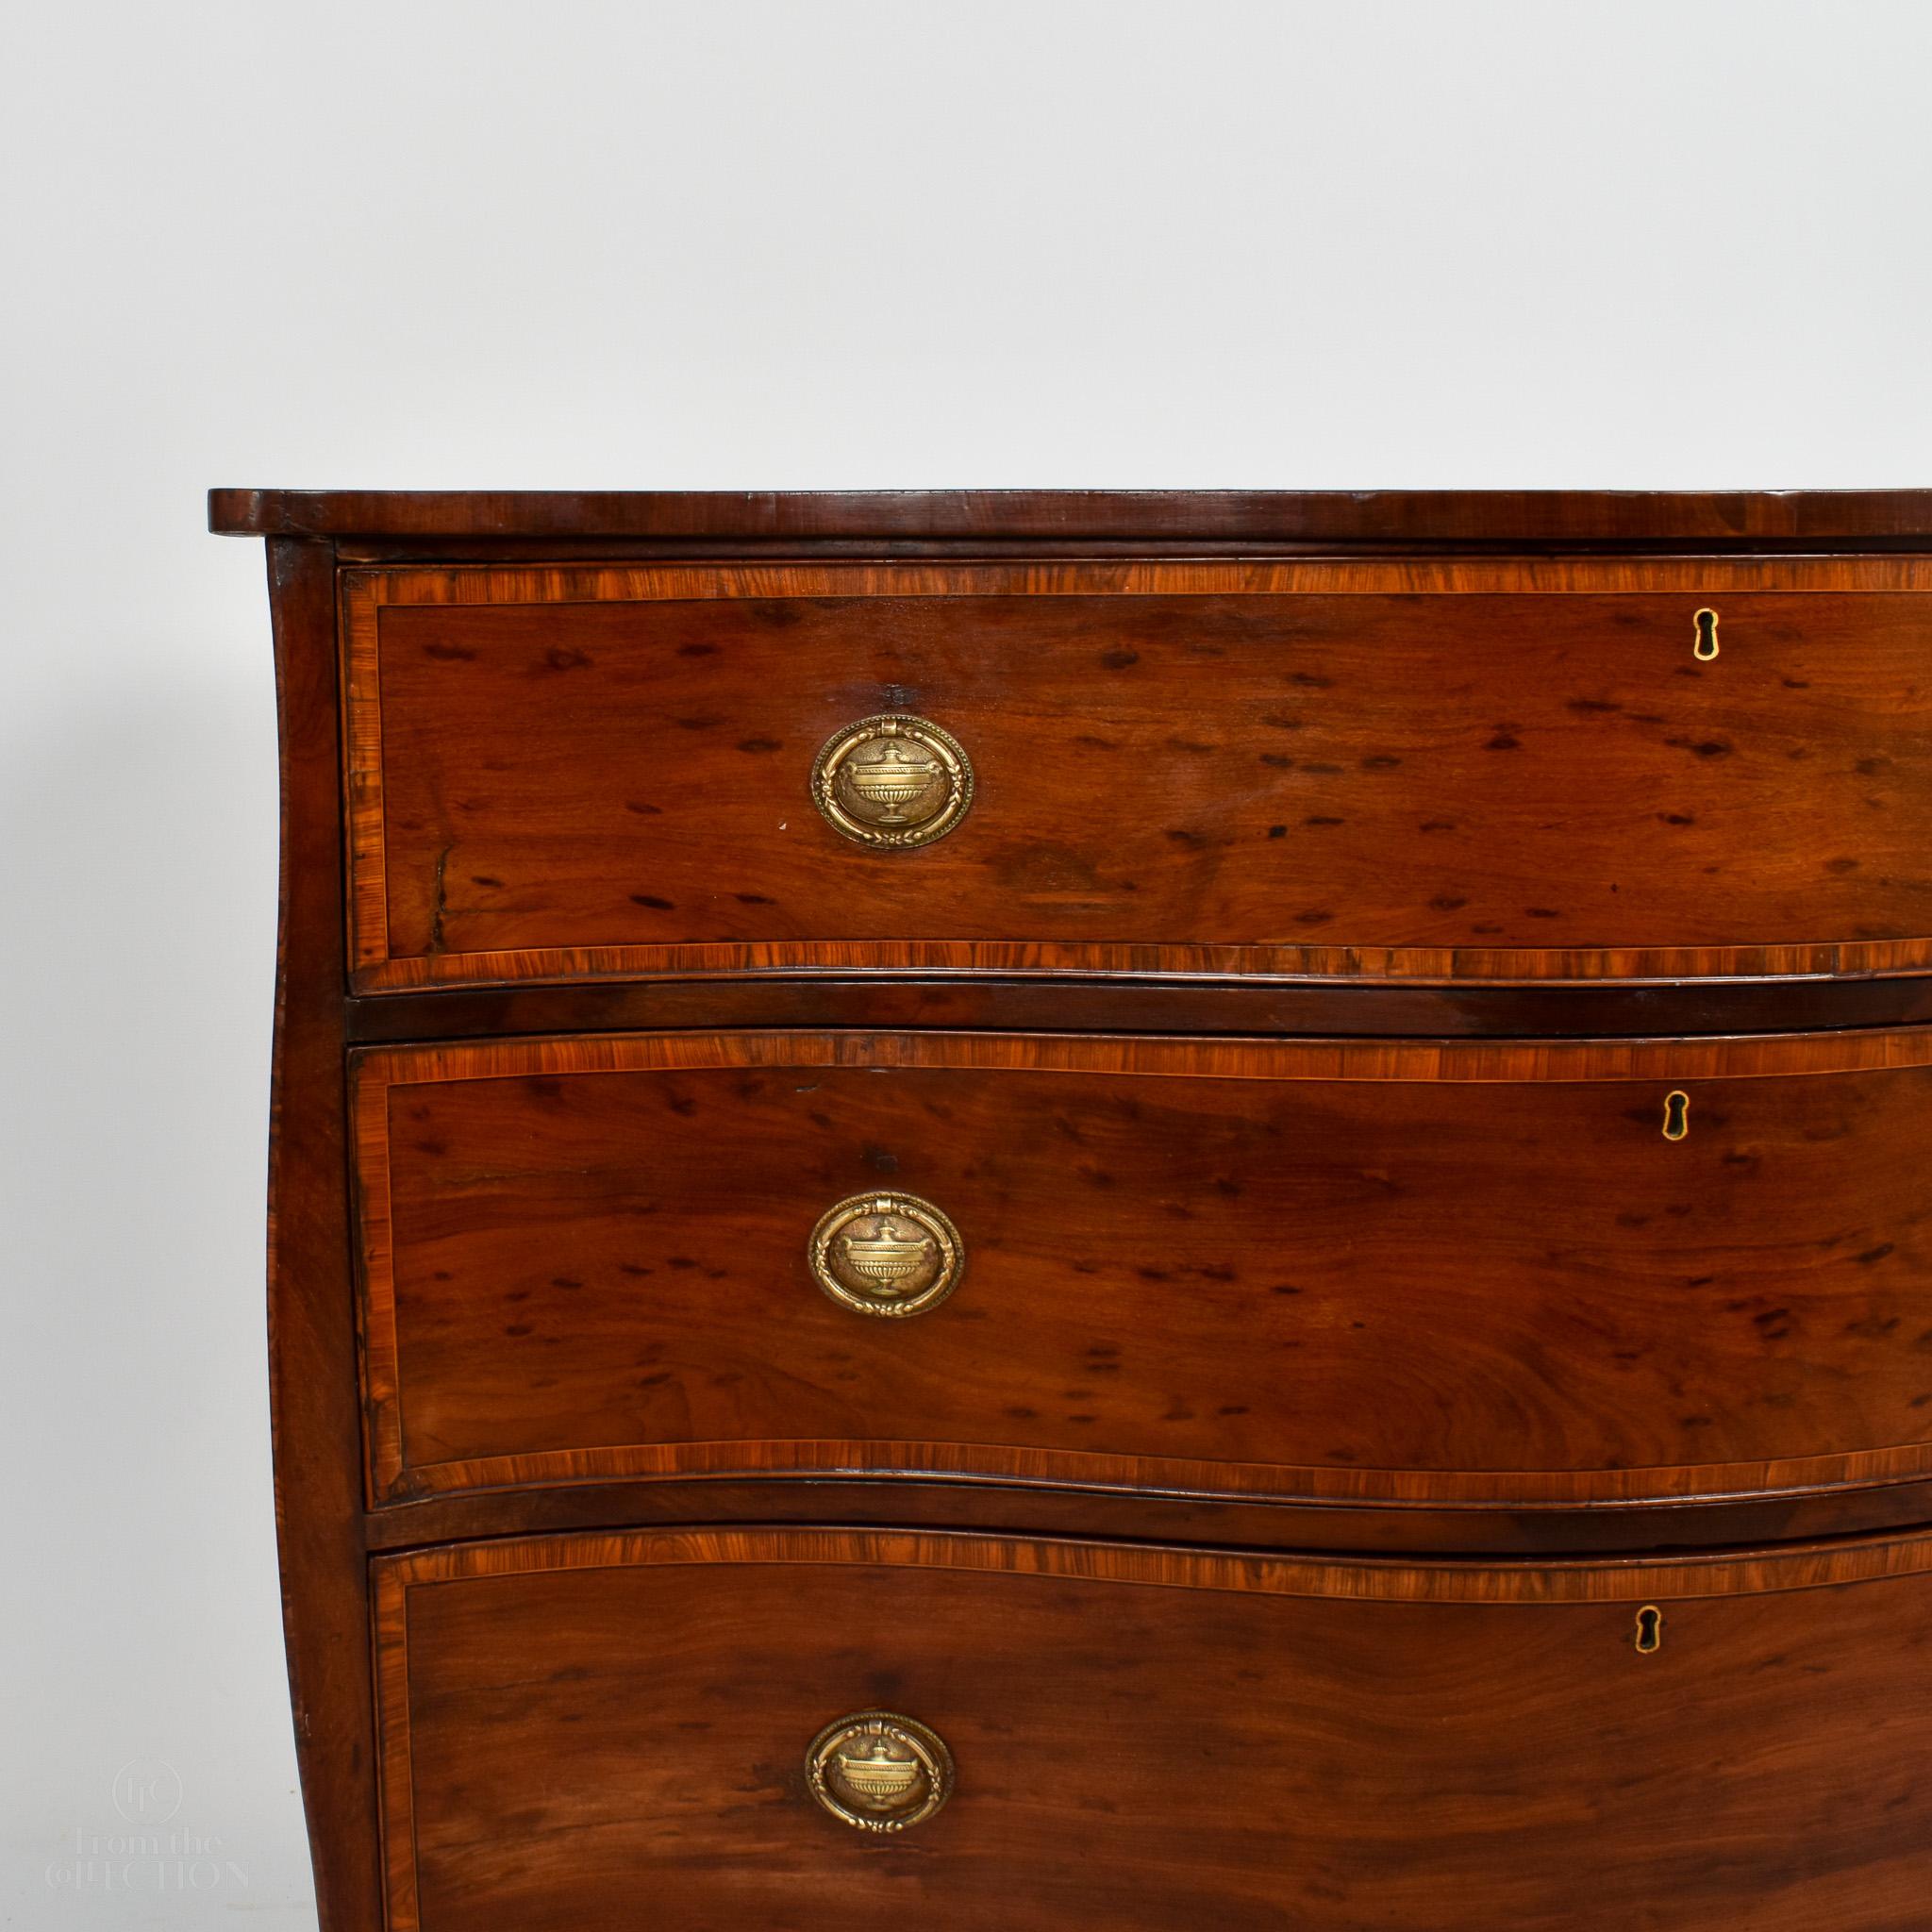 Serpentine fronted extremely fine mahogany commode circa 1780 George III. With three drawers each with a pair of brass handles. An exceptional example.